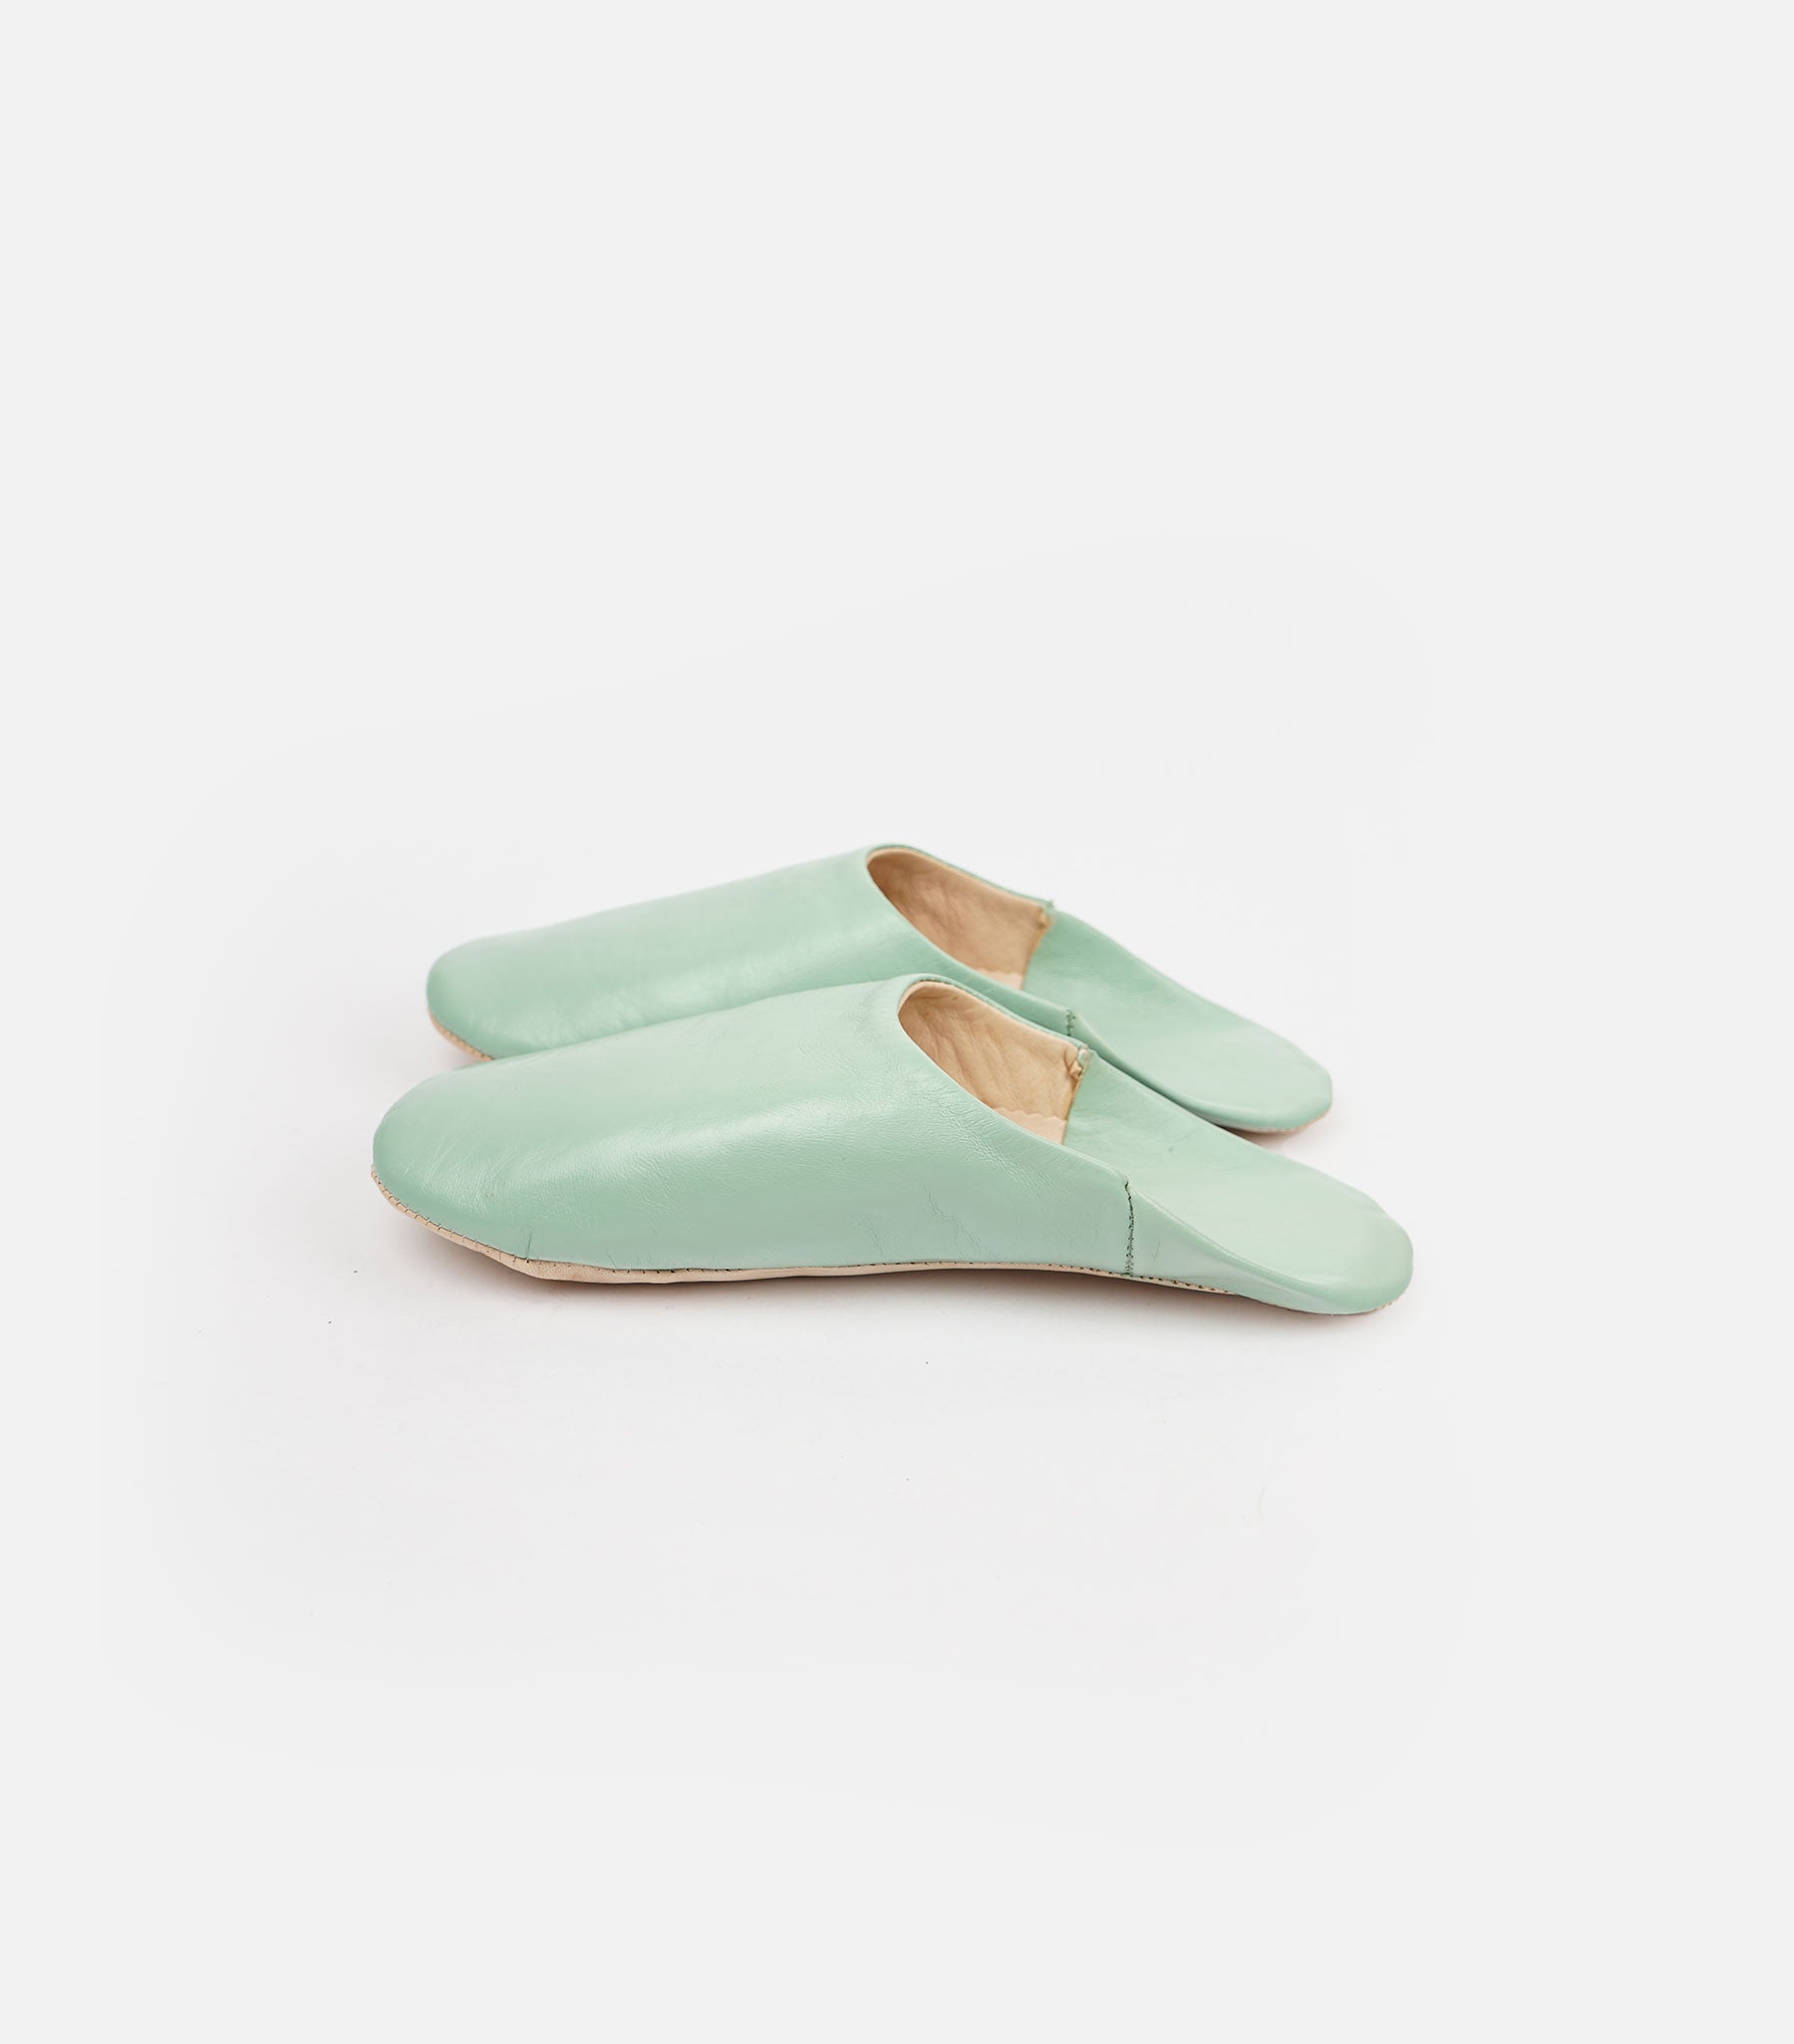 Moroccan Babouche Basic Slippers, Mint